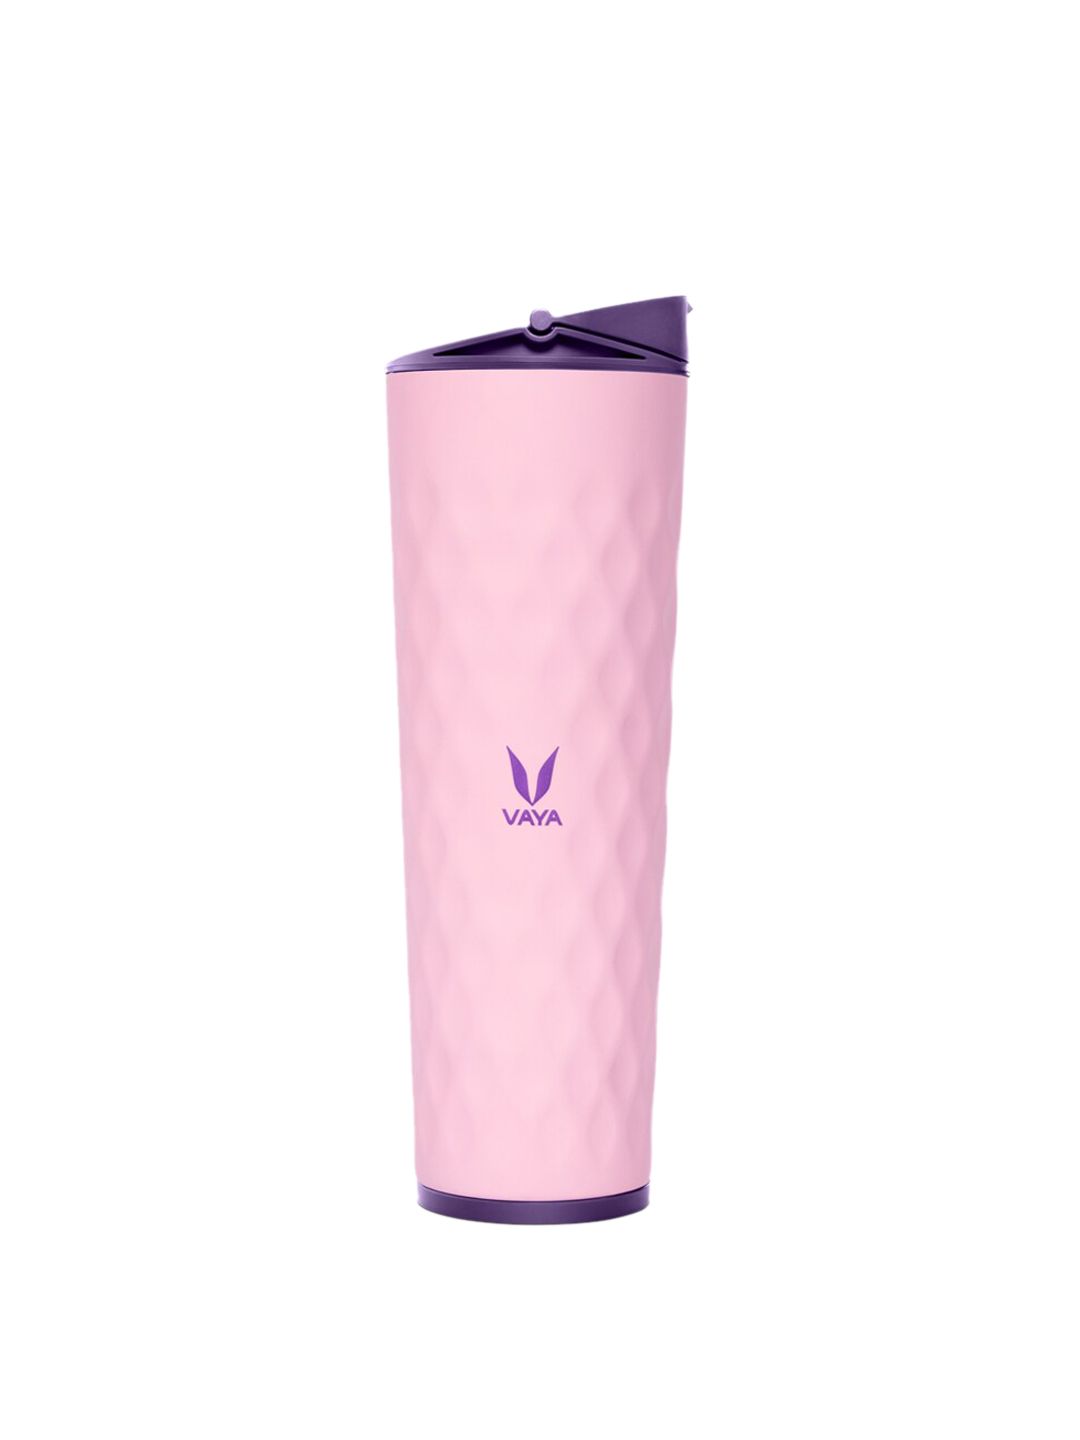 Vaya Pink Solid Stainless Steel Water Bottle 600ml Price in India